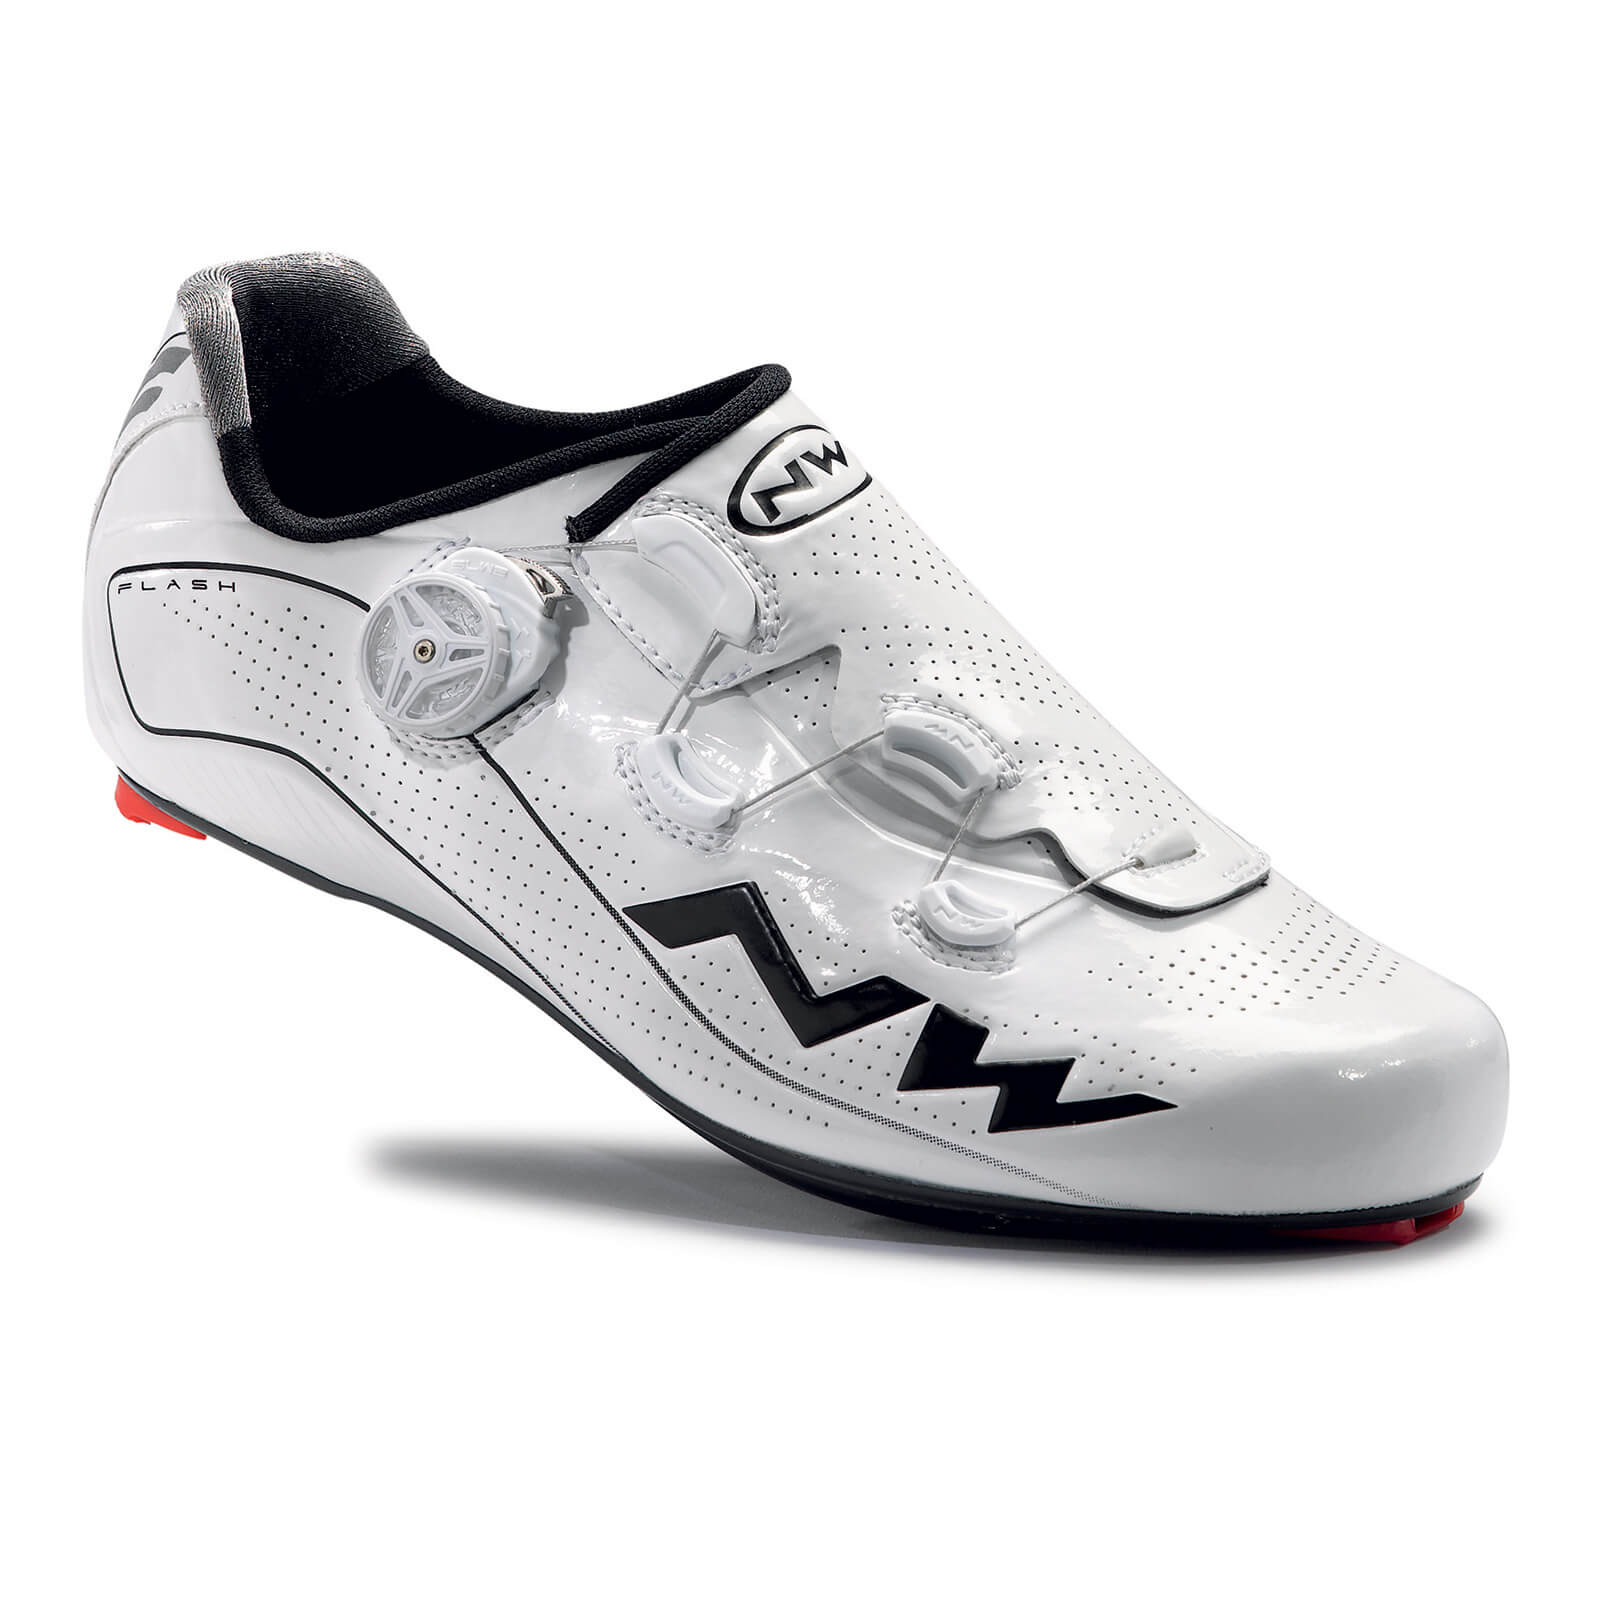 Northwave Flash Cycling Shoes - White 